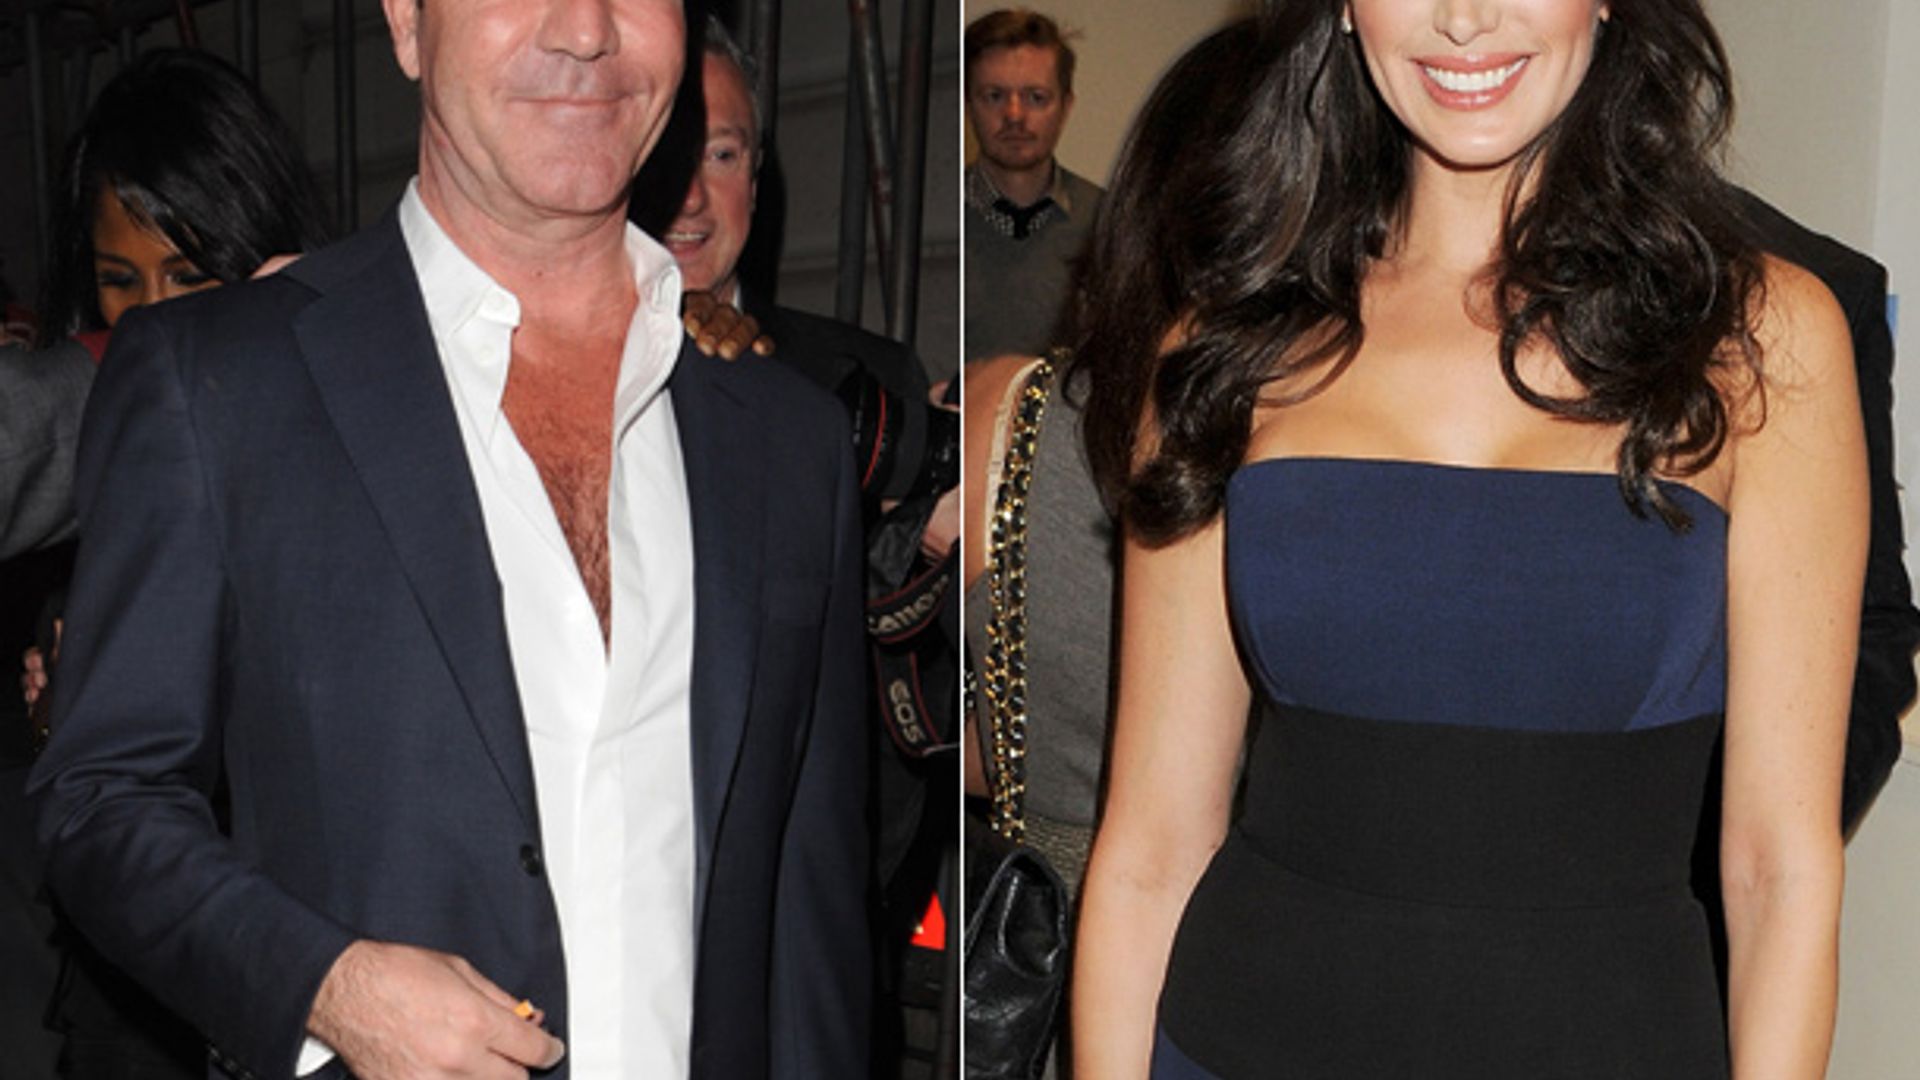 Simon Cowell 'expecting a baby' with US socialite Lauren Silverman